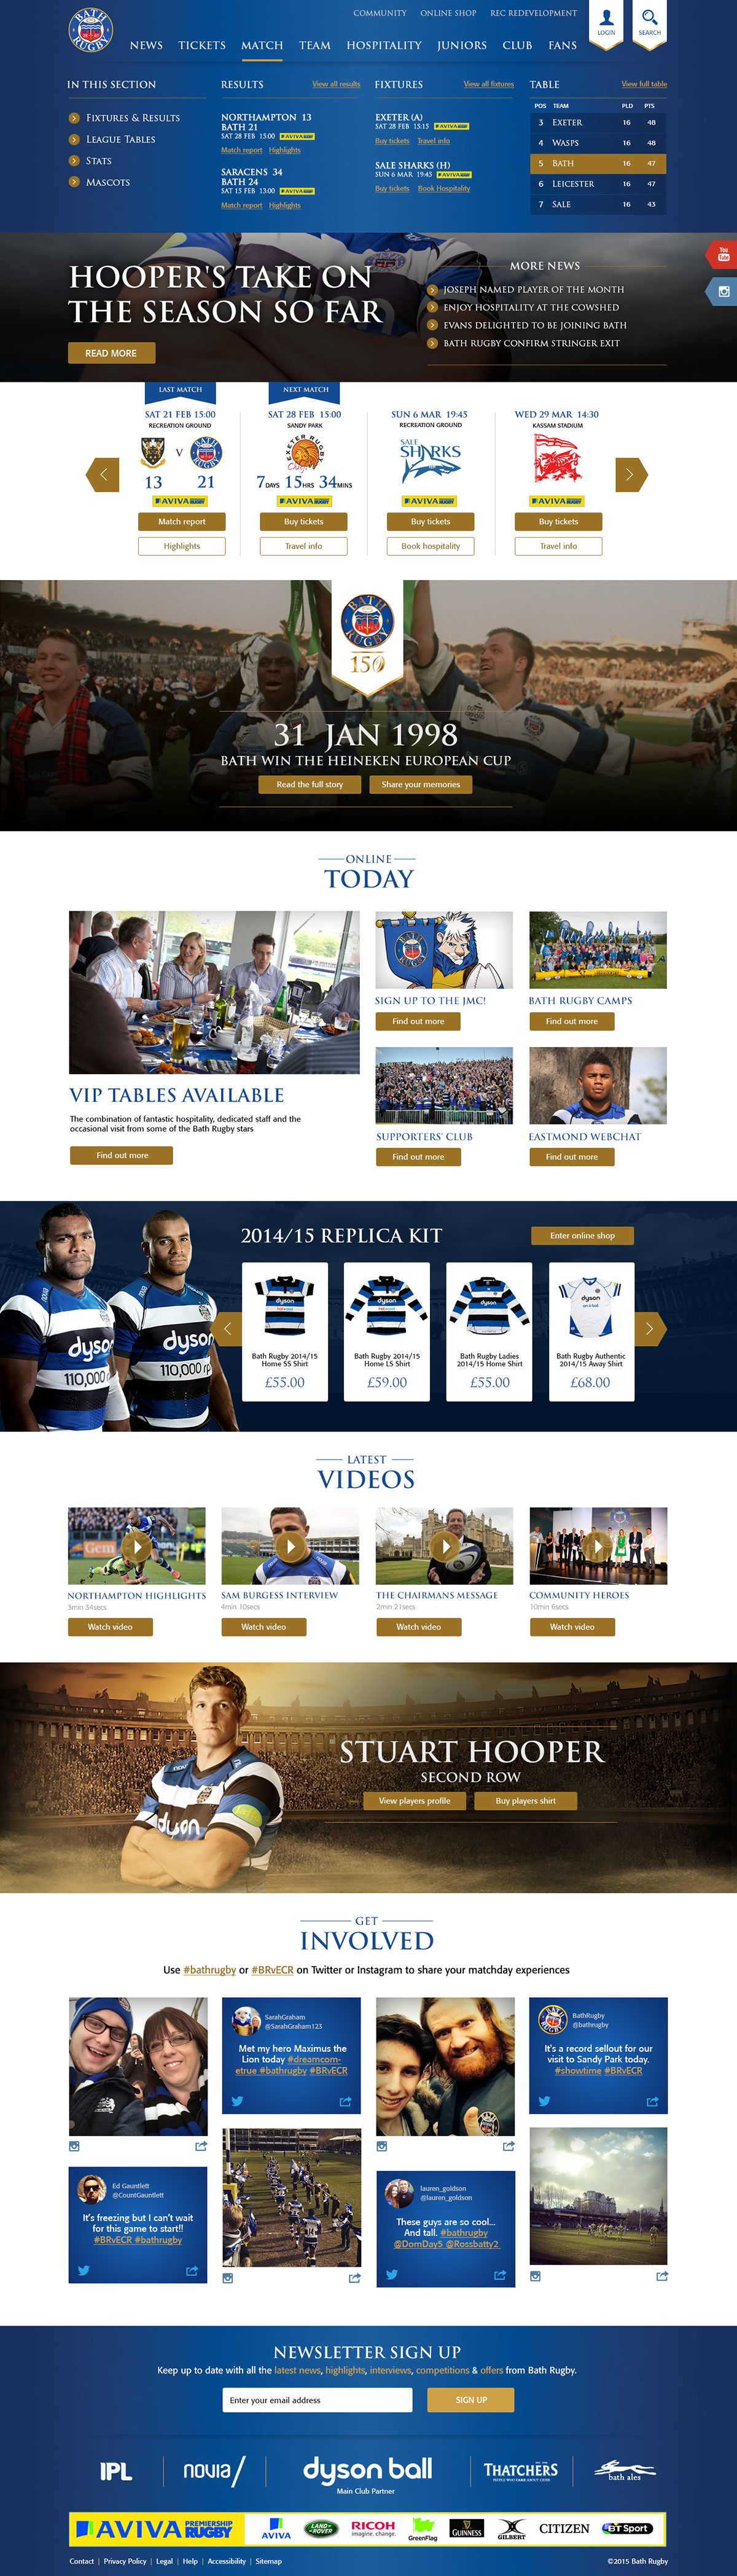 bath Rugby sport soccer club Players Rugby Union union sports website Website